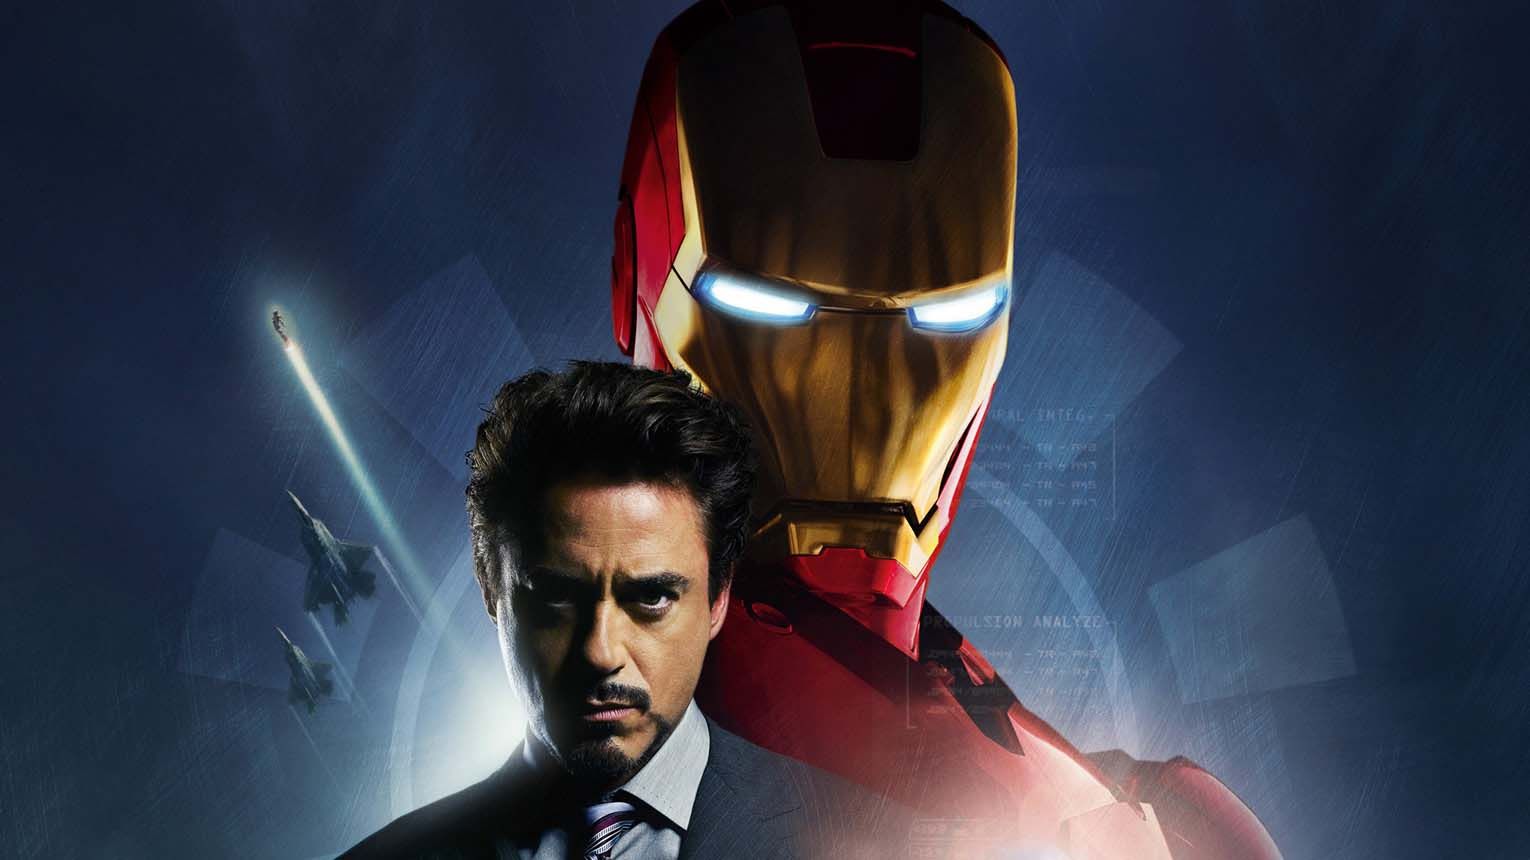 Most Inspiring Tony Stark Quotes From Marvel (MCU)